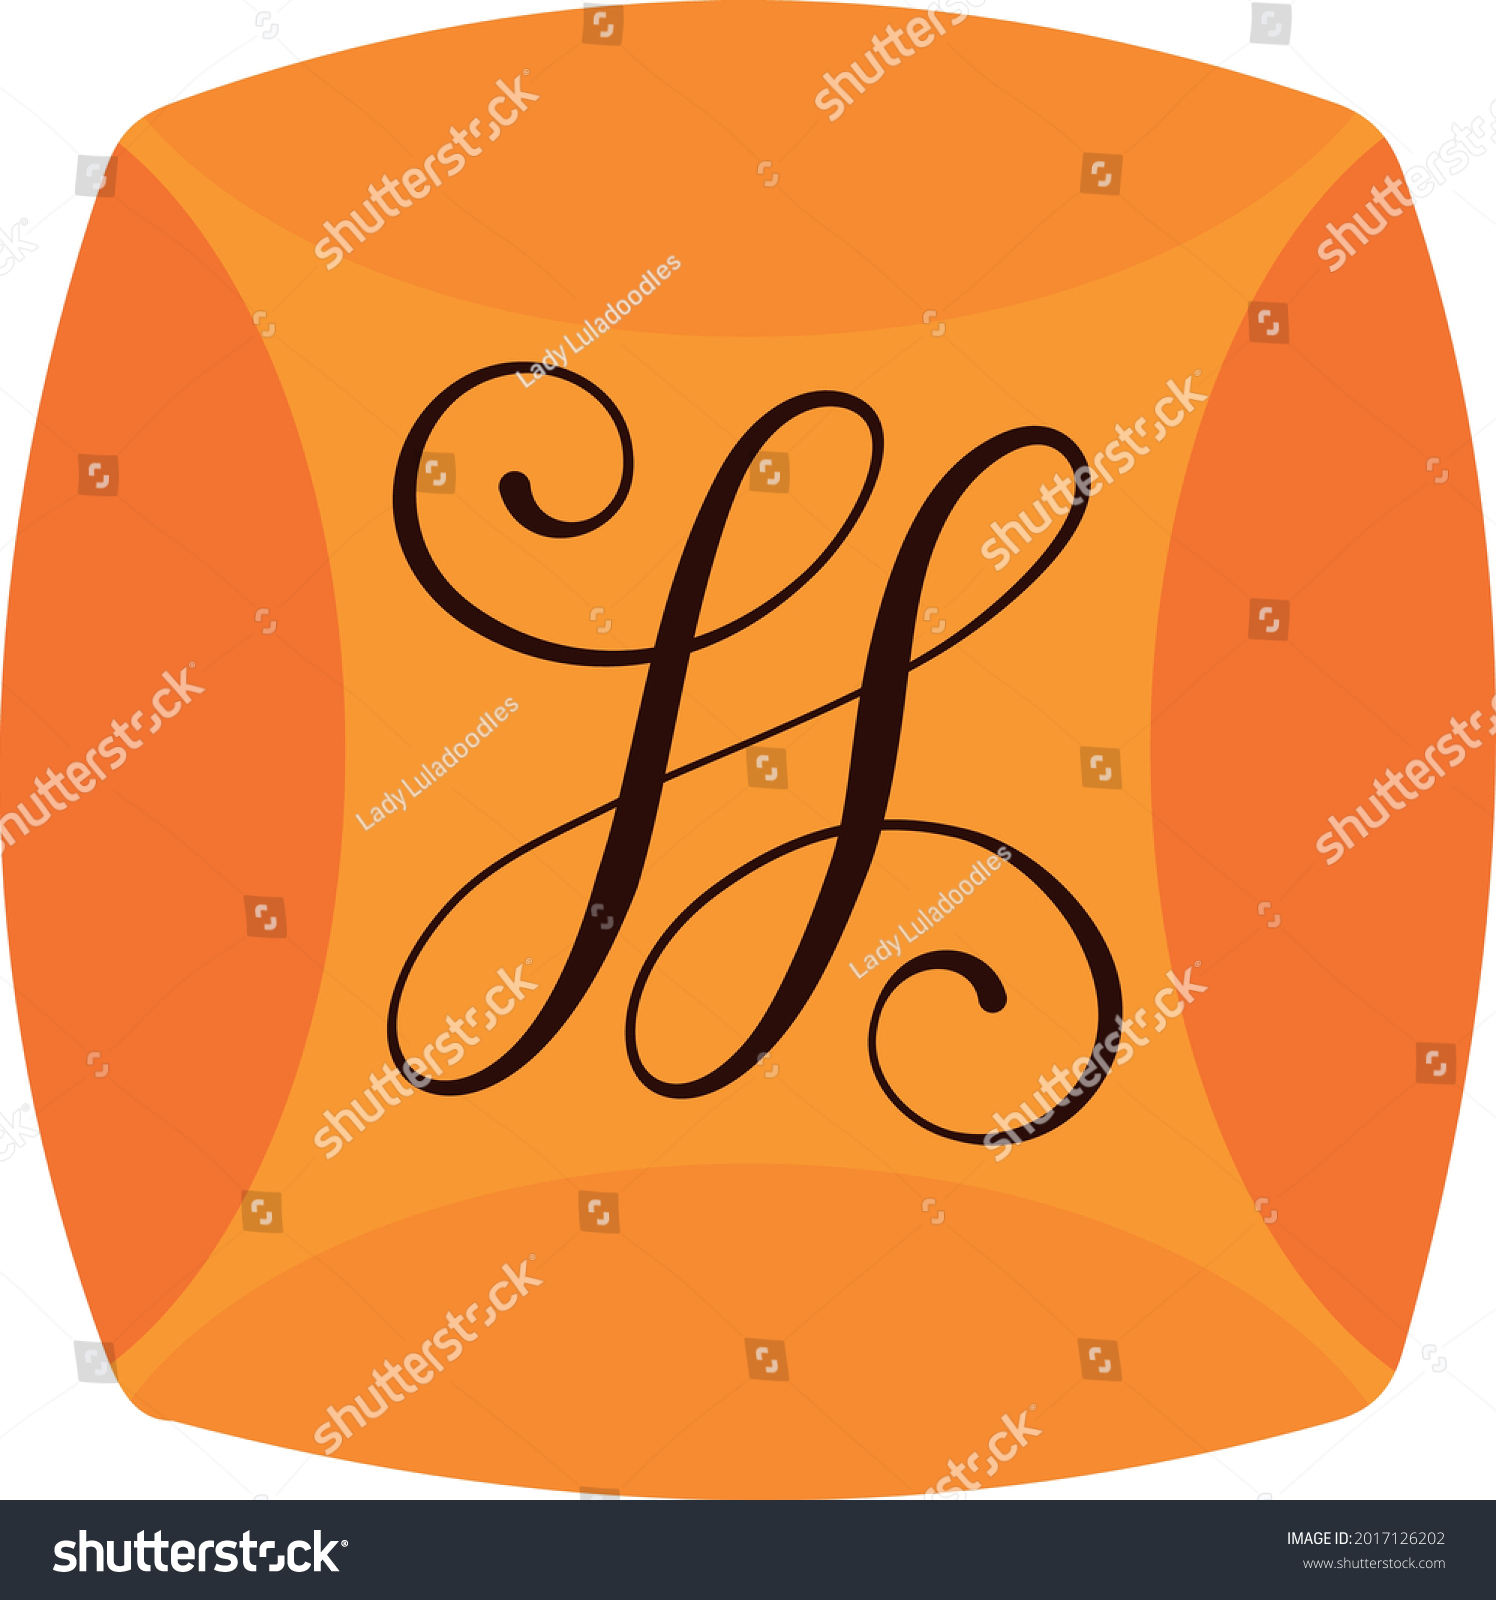 SVG of Orange round square cushion style Chocolate candy with shading and dark brown flourished decoration. Layered confectionery SVG svg